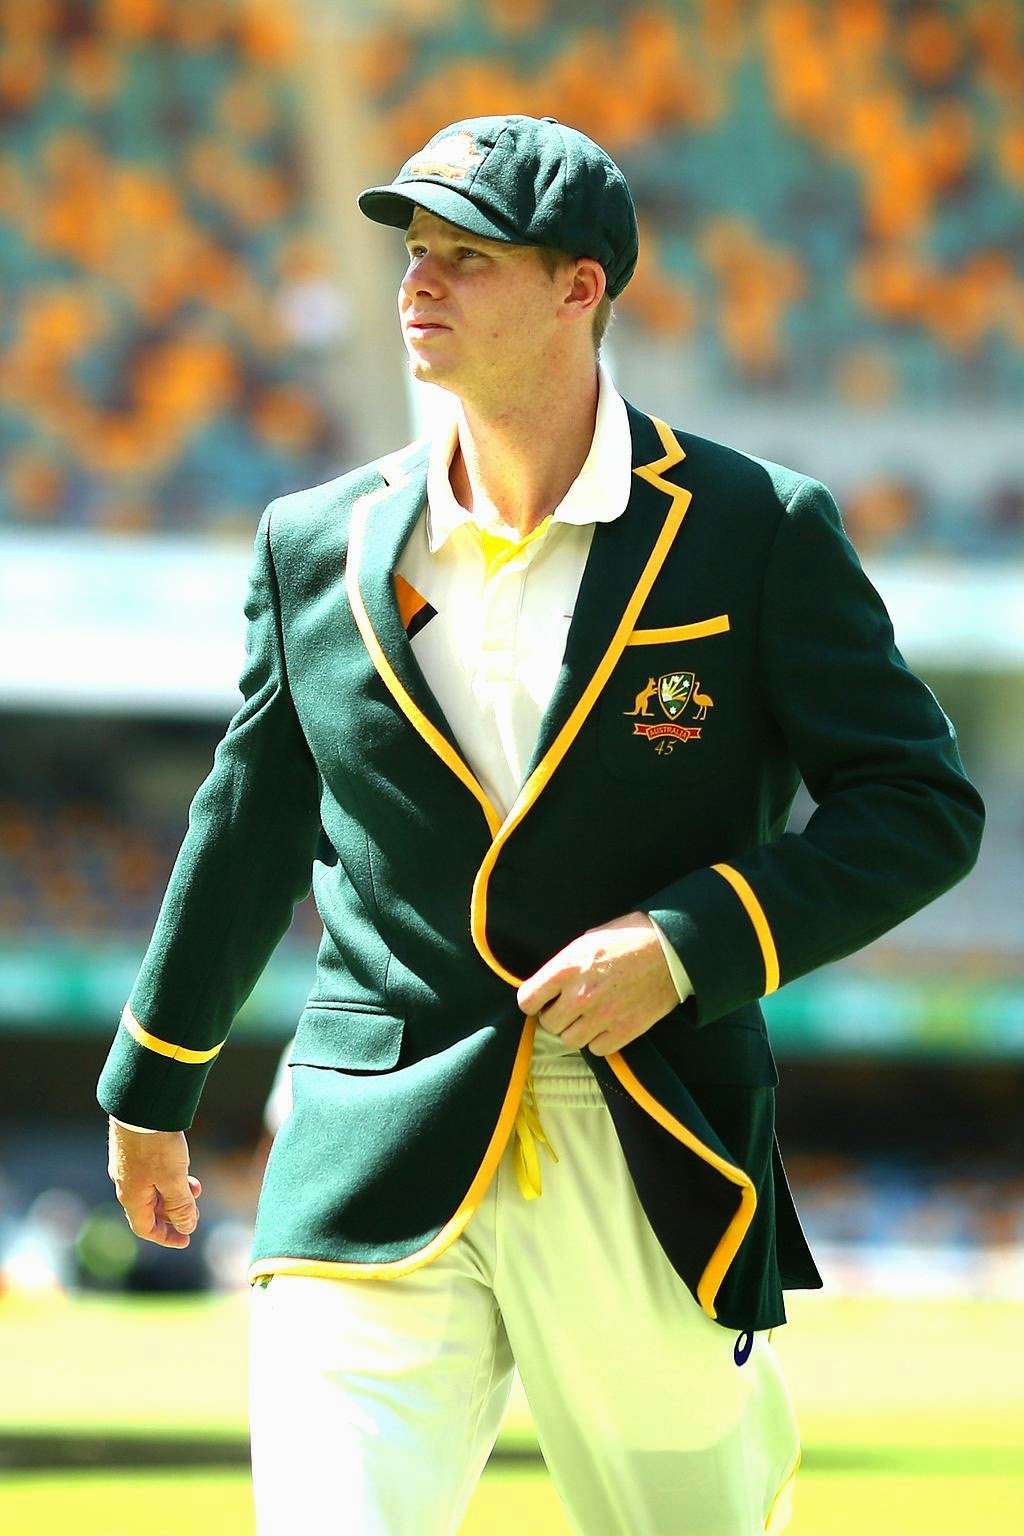 Cricket Gloden Moments: The proud moment in the life of Steven Smith, to wear ...1024 x 1536